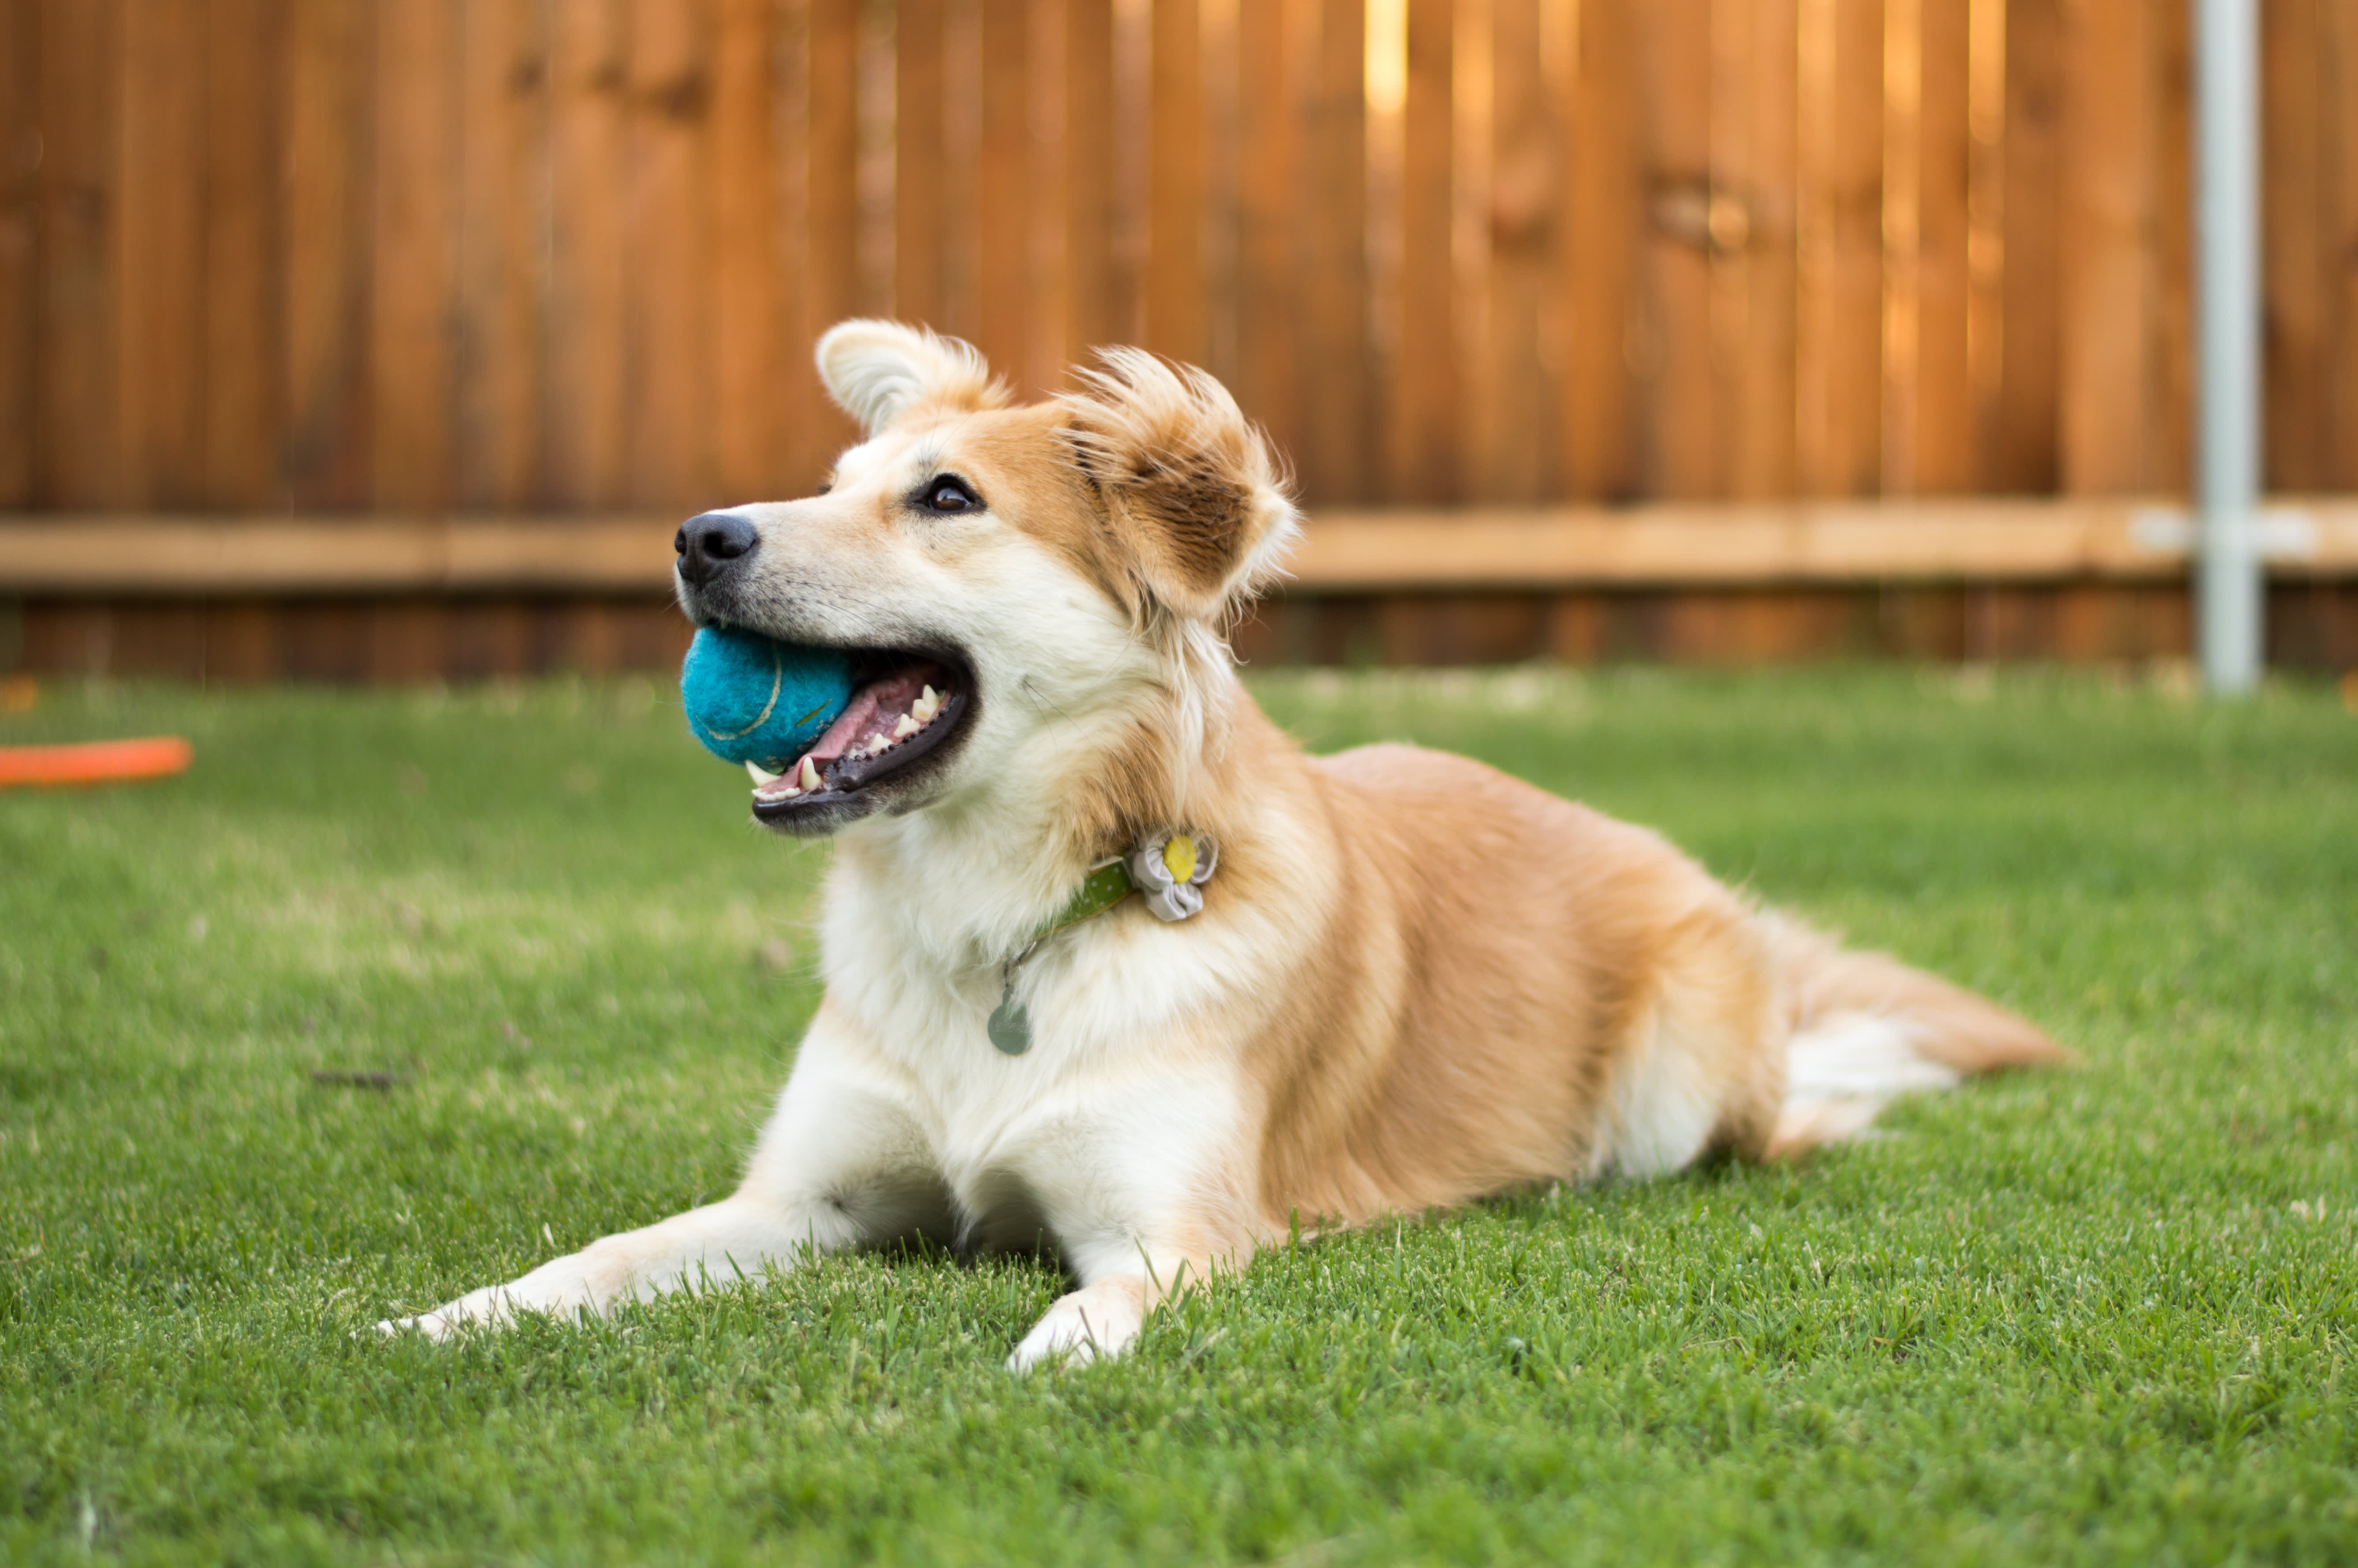 Homemade activities to keep your dog busy during quarantine